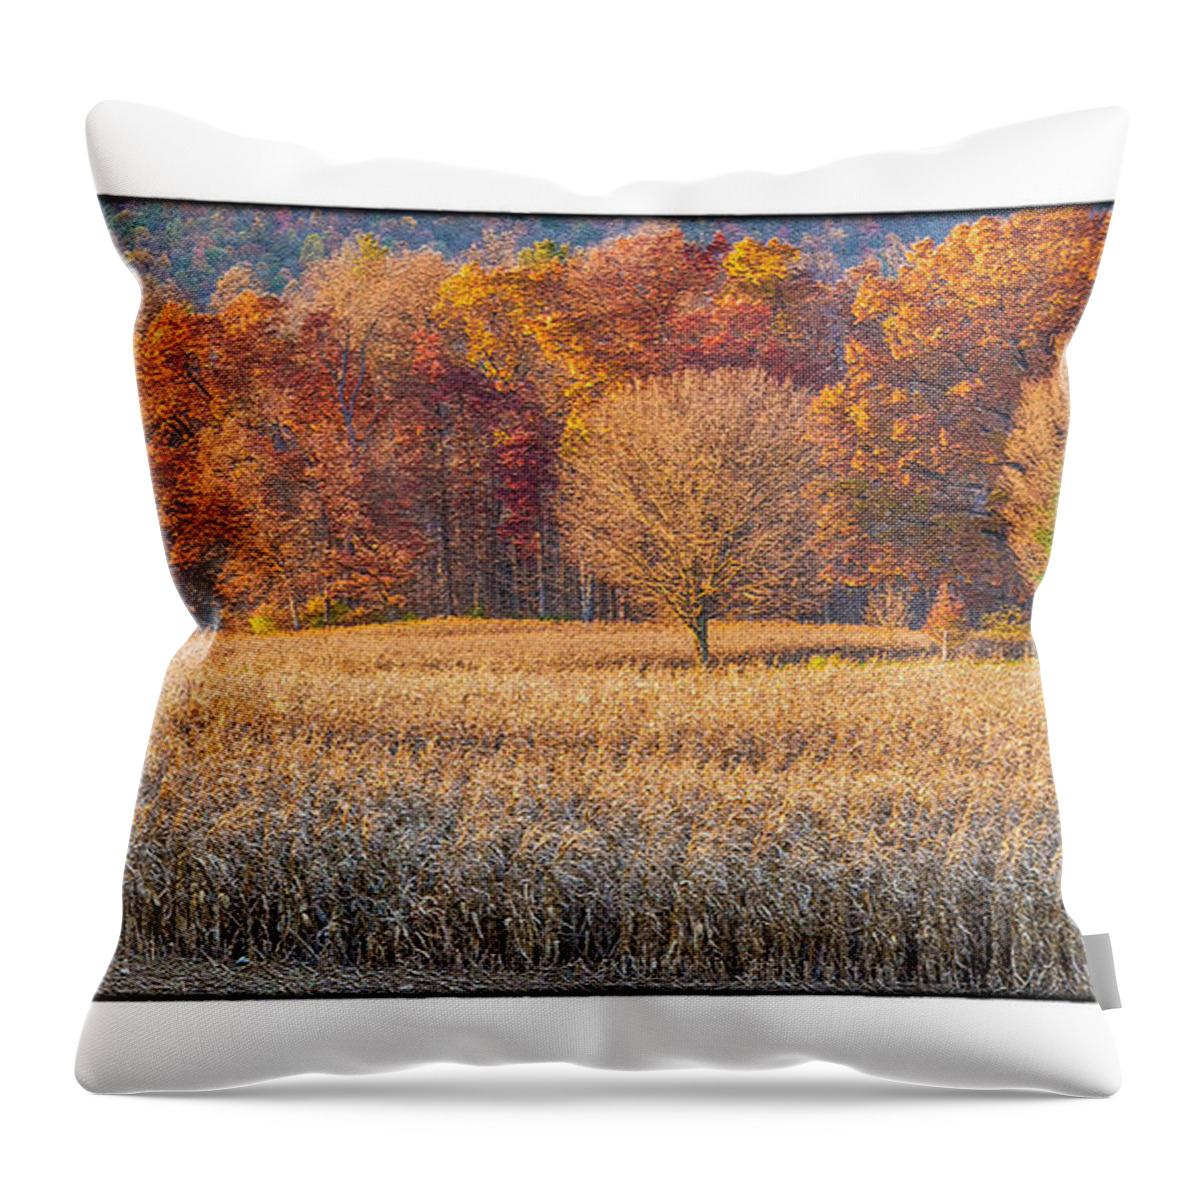 Rural Throw Pillow featuring the photograph Fading Fall by R Thomas Berner